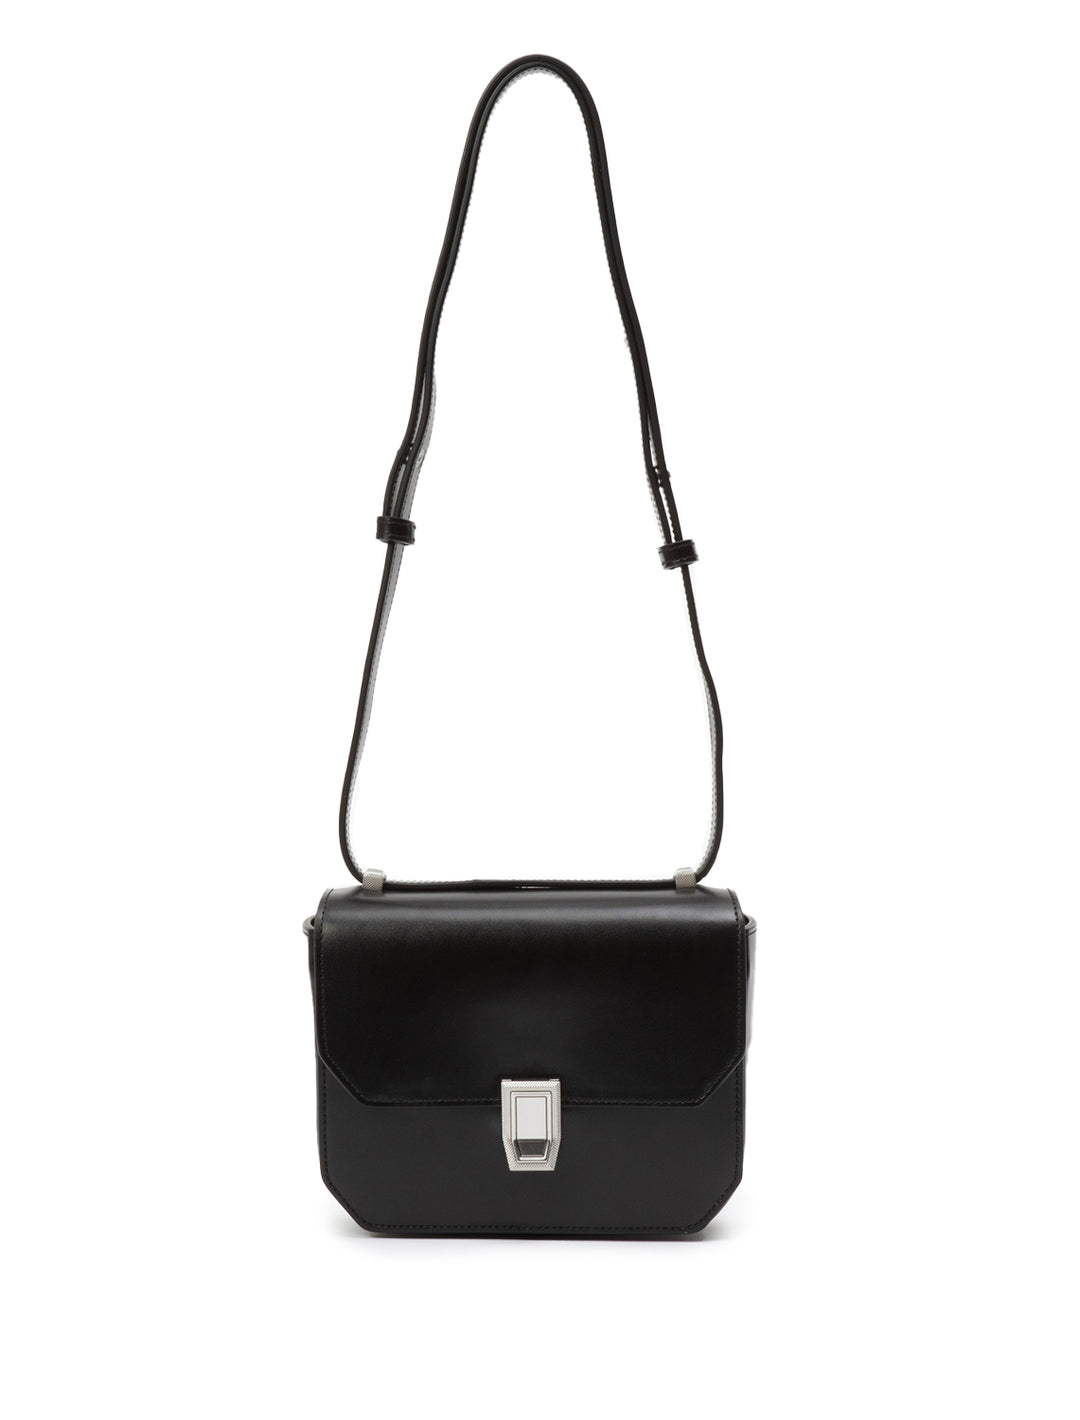 Front view of Rag & Bone's max small crossbody in black.